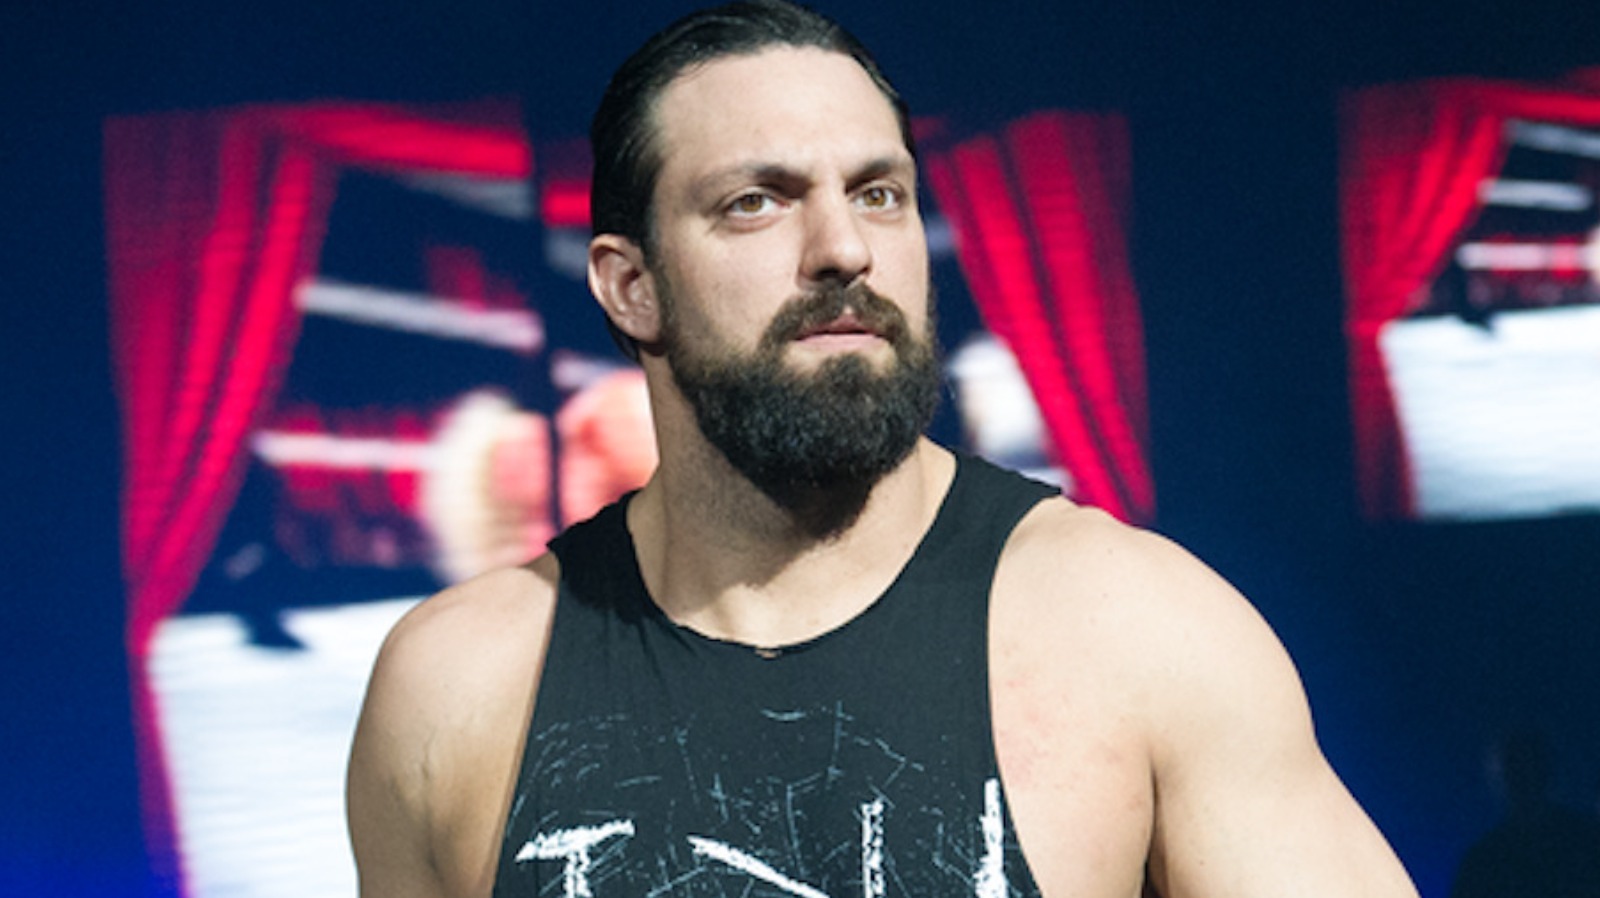 It's time for Damien Sandow's first ever title reign in WWE